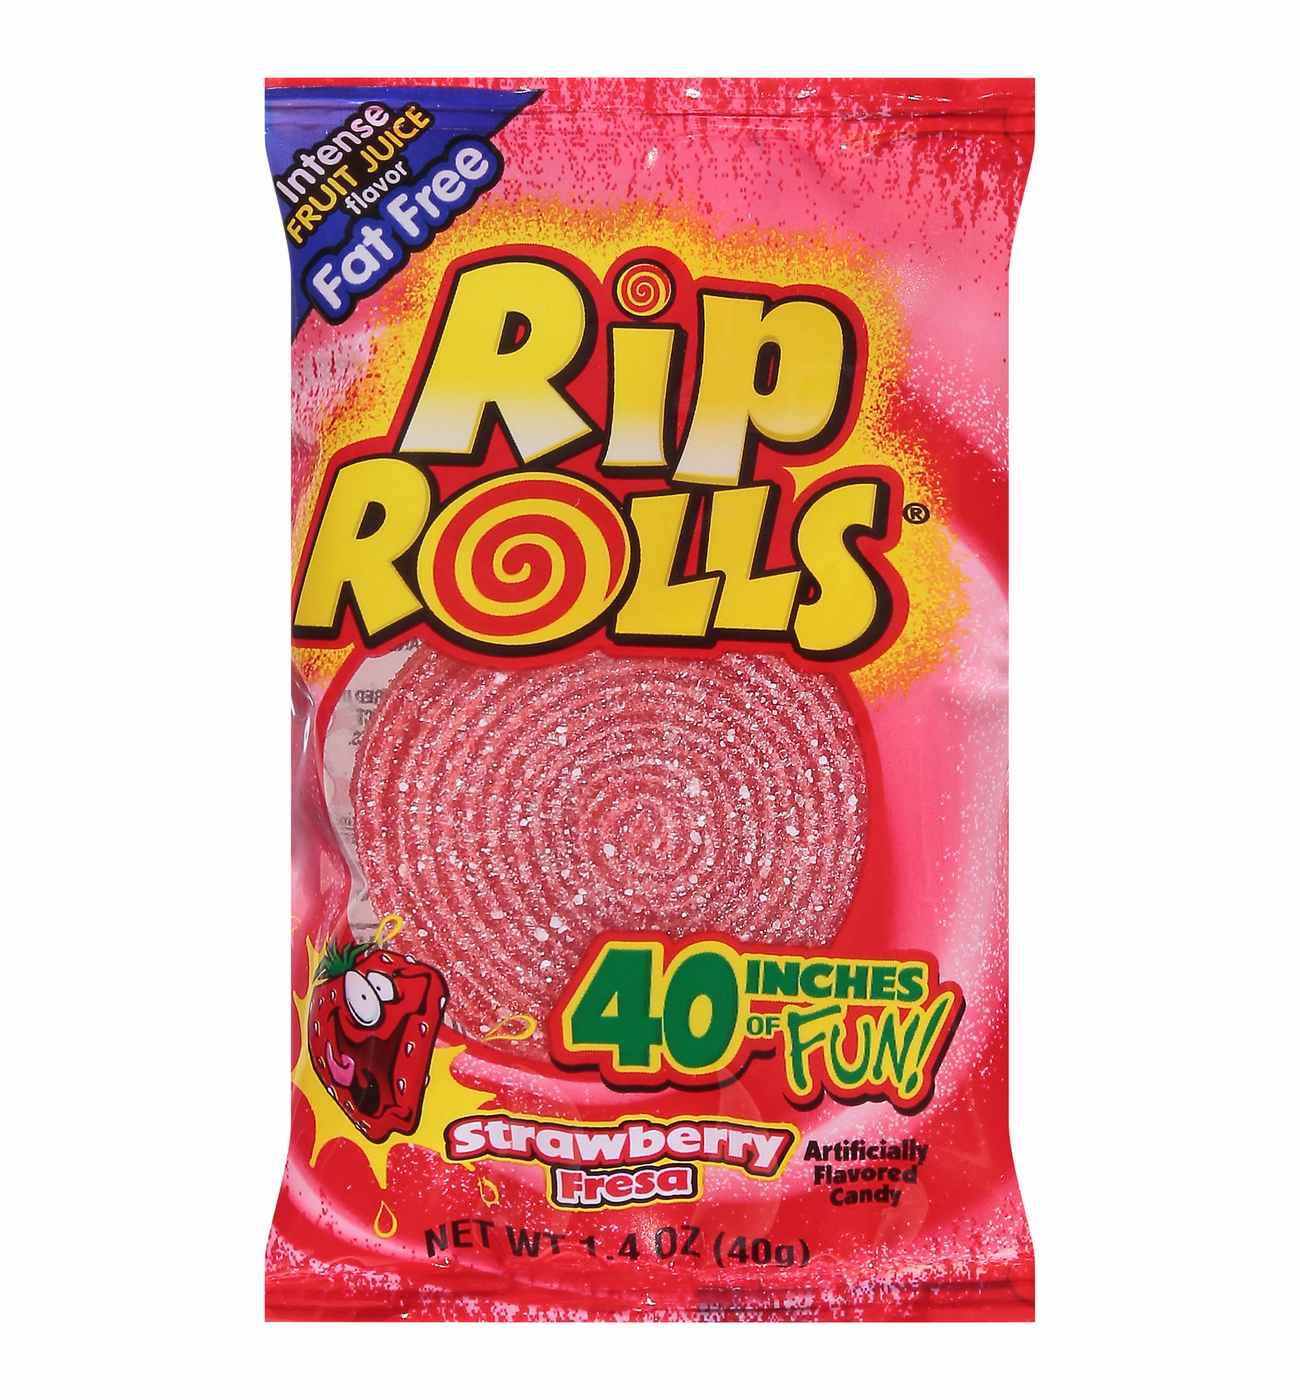 Rip Rolls Strawberry Candy; image 1 of 2